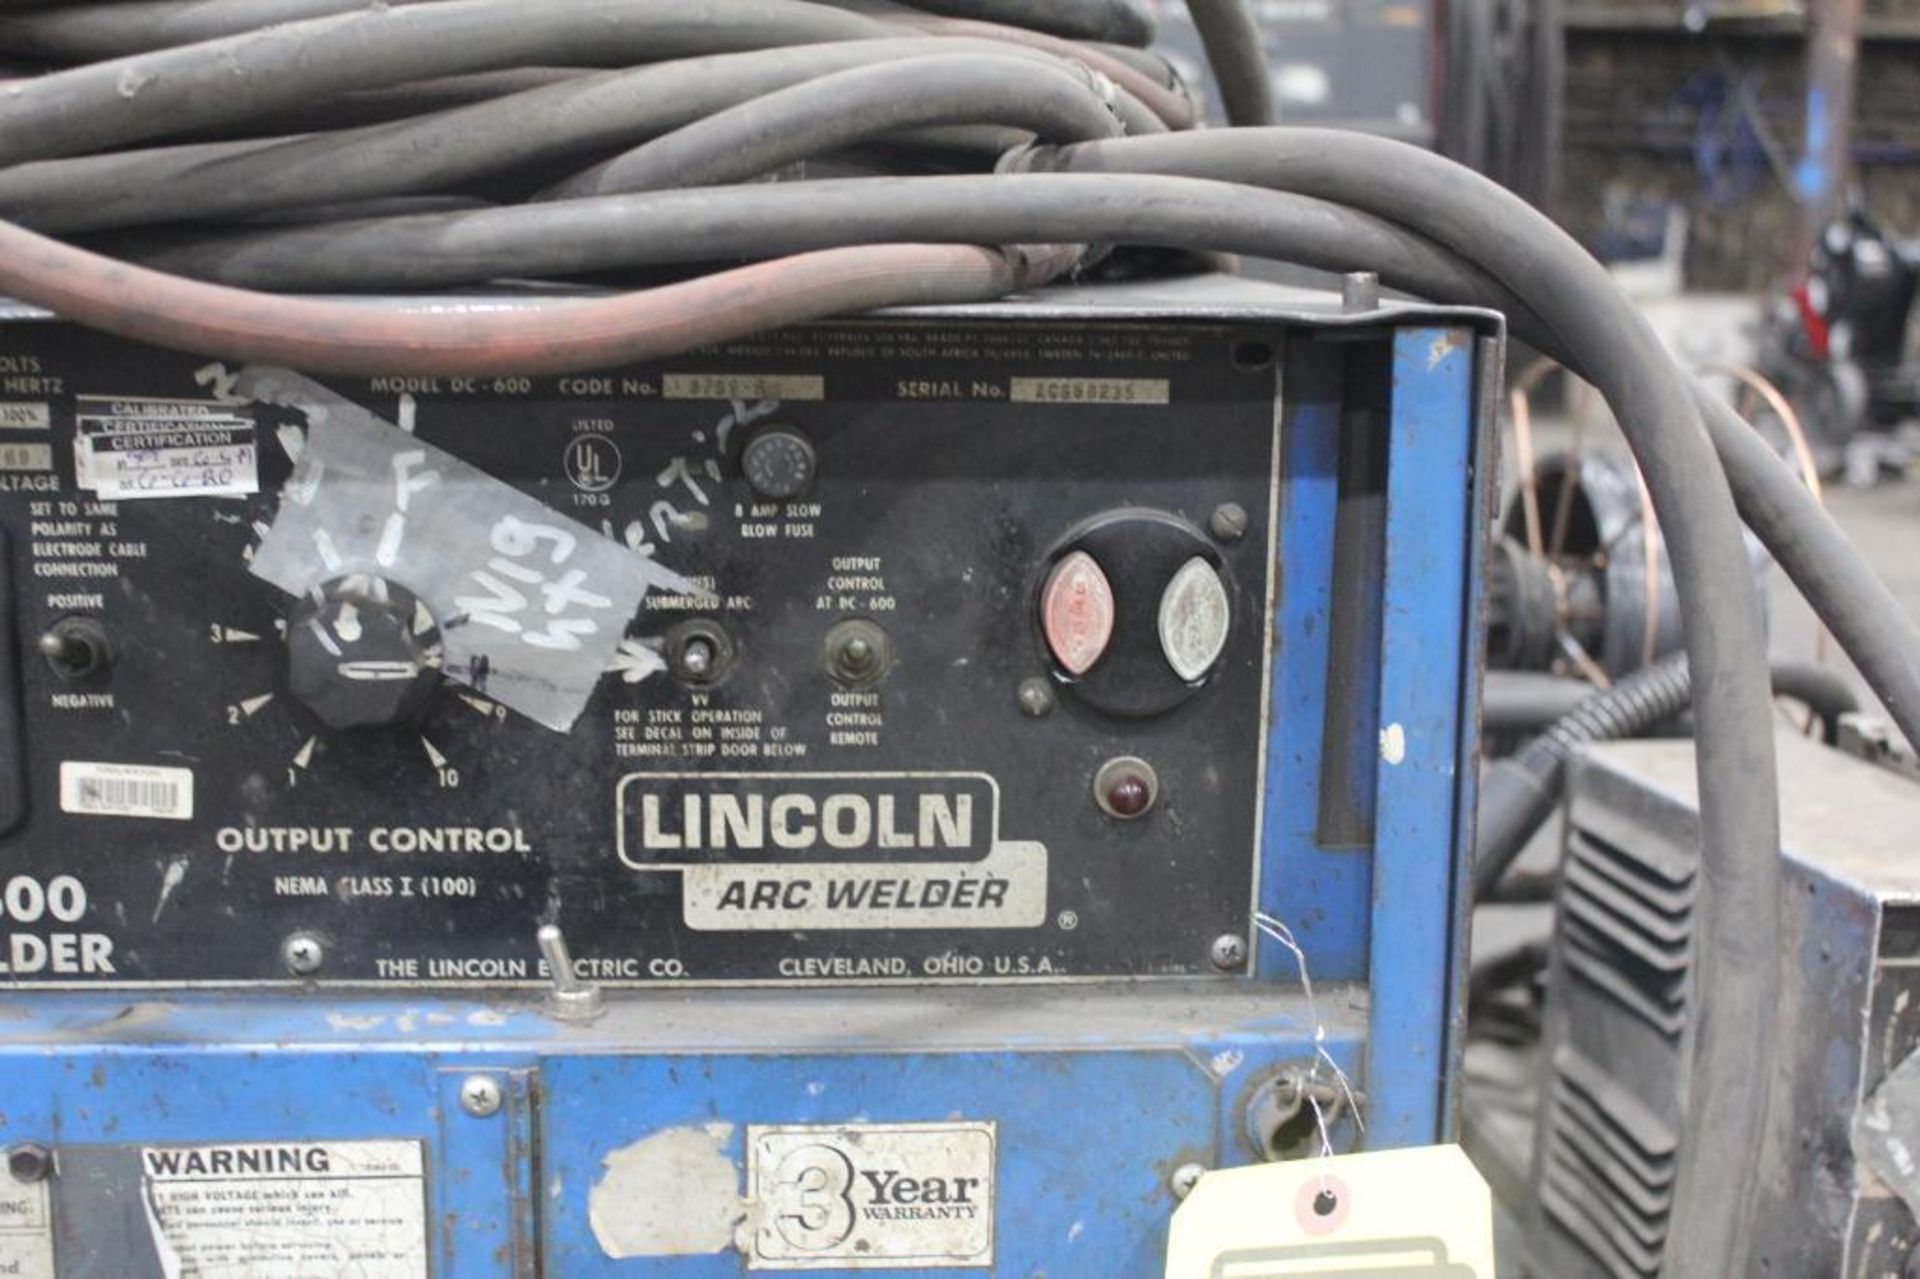 LINCOLN ELECTRIC IDEALARC DC-600 WELDER SN.AC658235 230-460V WITH LN-8 WIRE FEED SN.57089 115V - Image 9 of 10